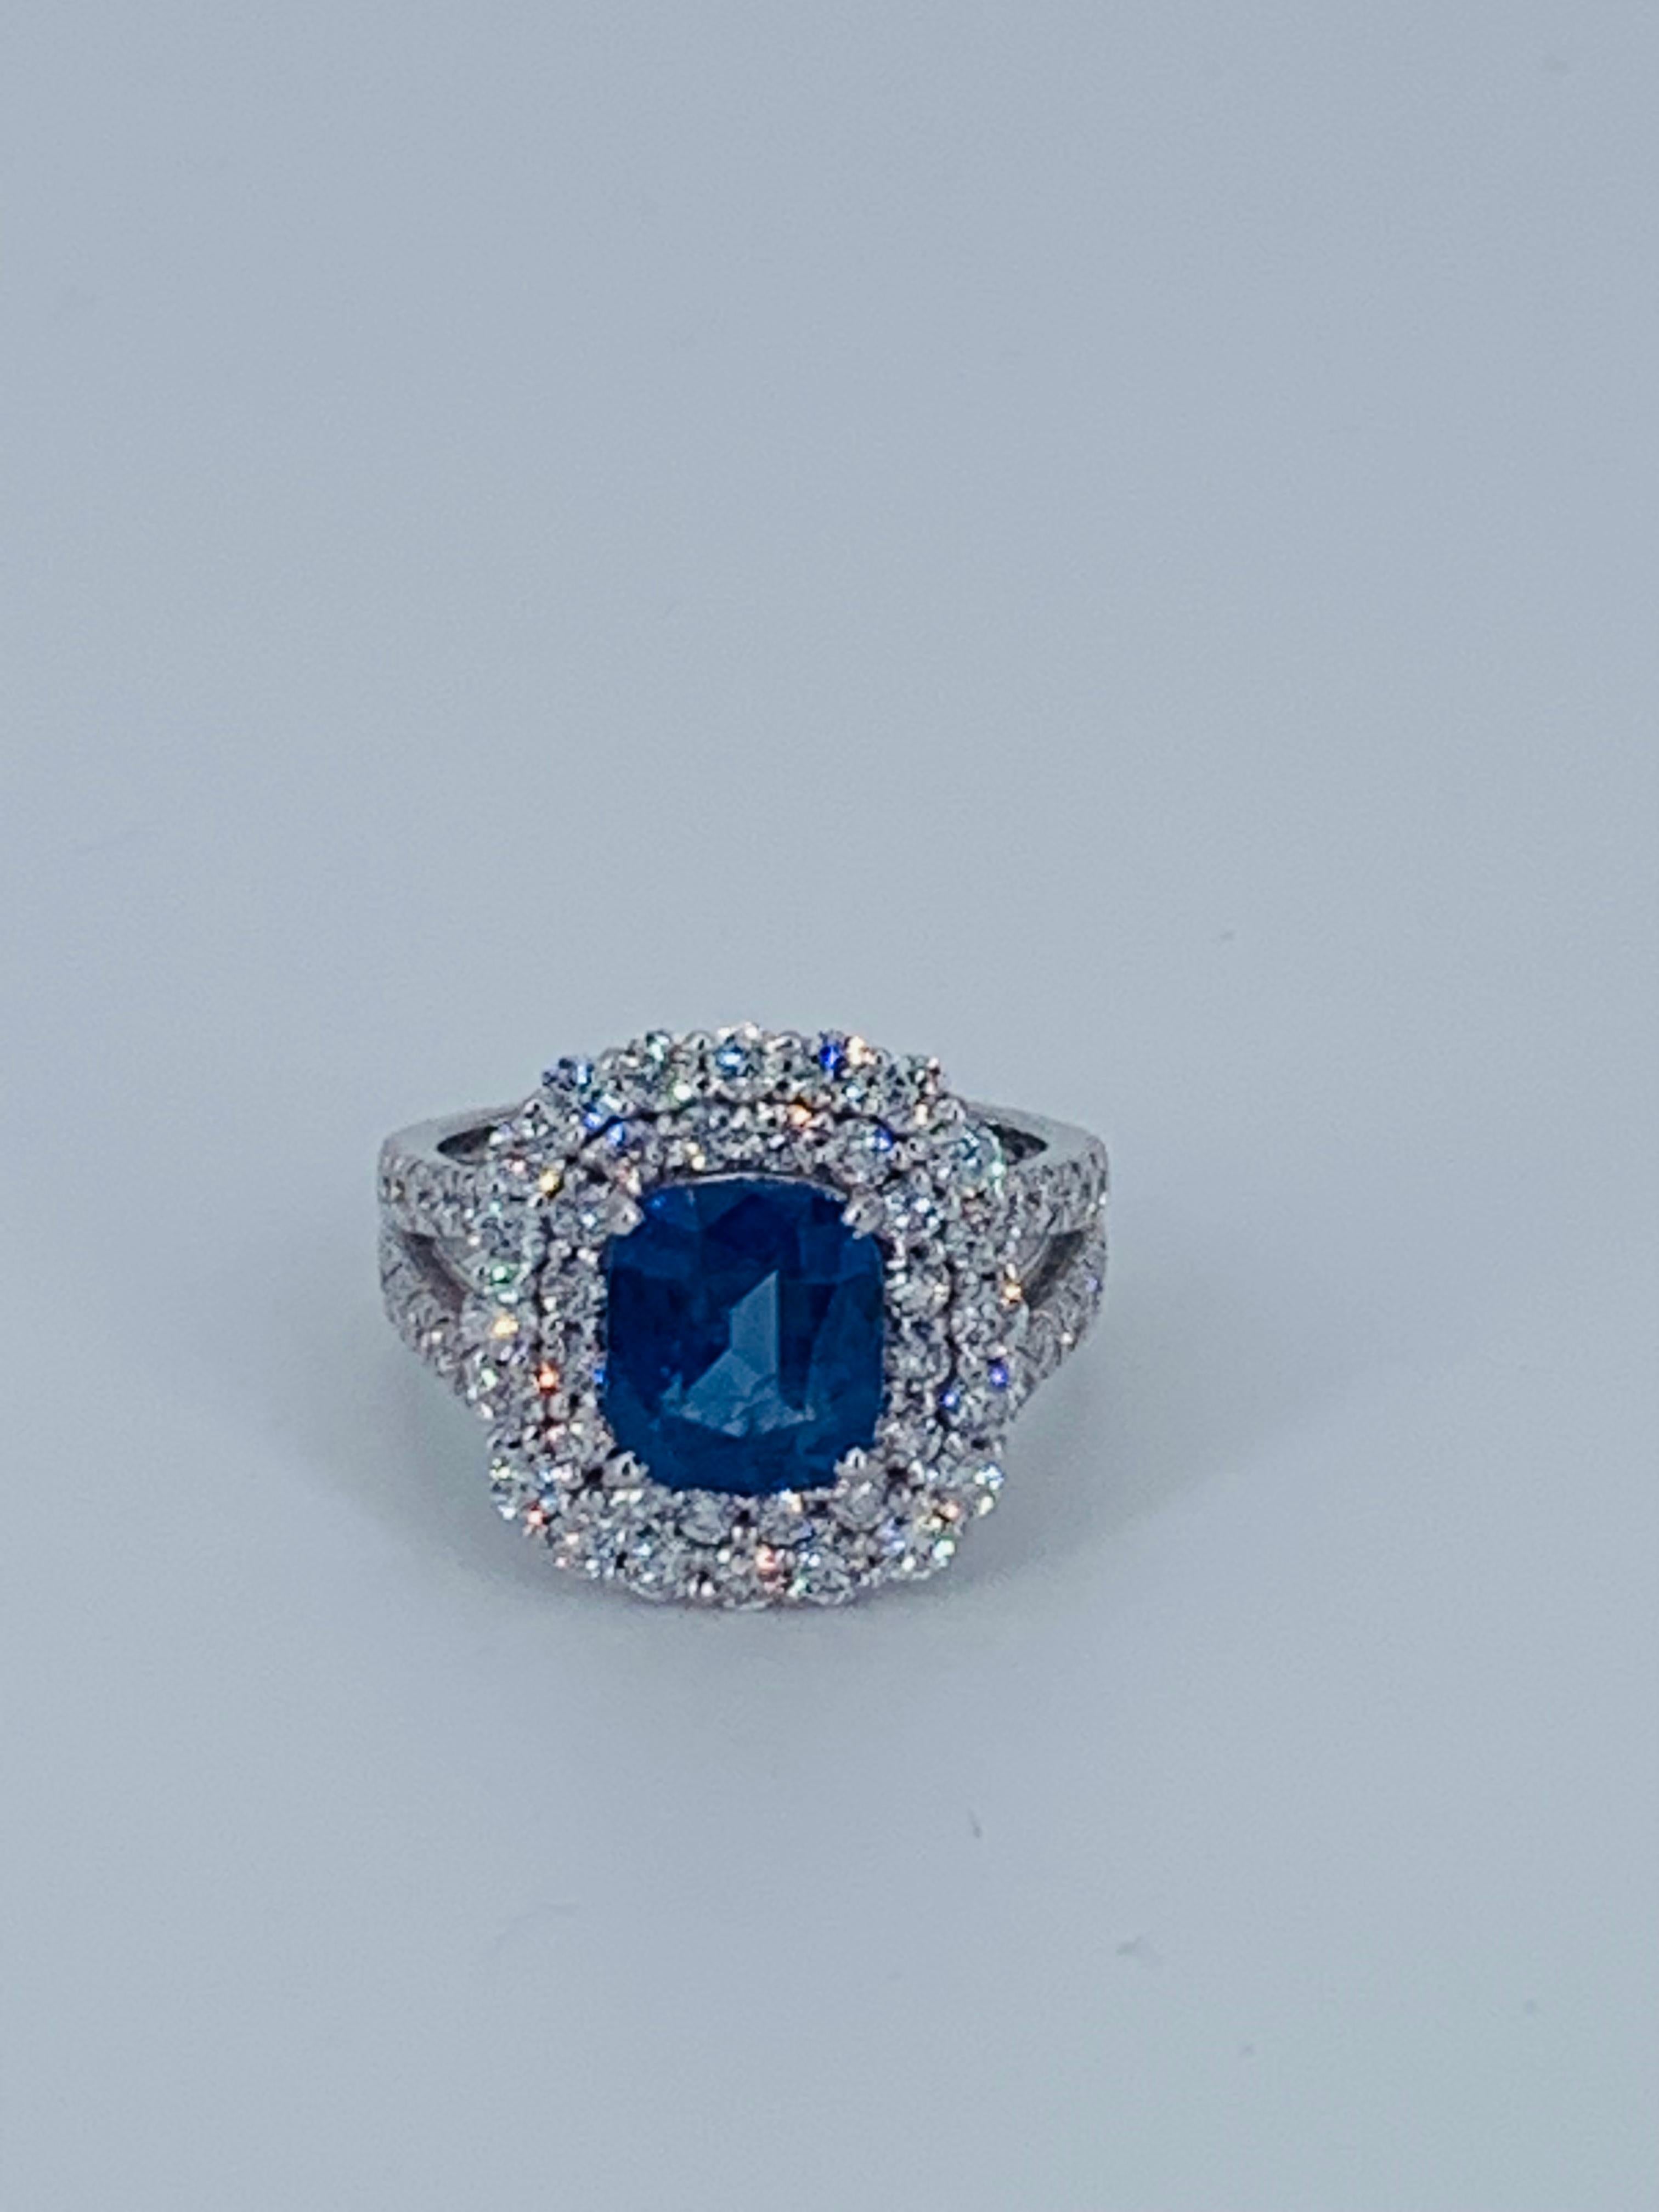 This beautiful Sapphire and Double Diamond Halo cocktail ring is truly gorgeous. Nestled amongst multiple Diamonds the Sapphire is cushioned in the centre. 

The bright white natural Diamonds compliment the precious jewel and extend the beauty of